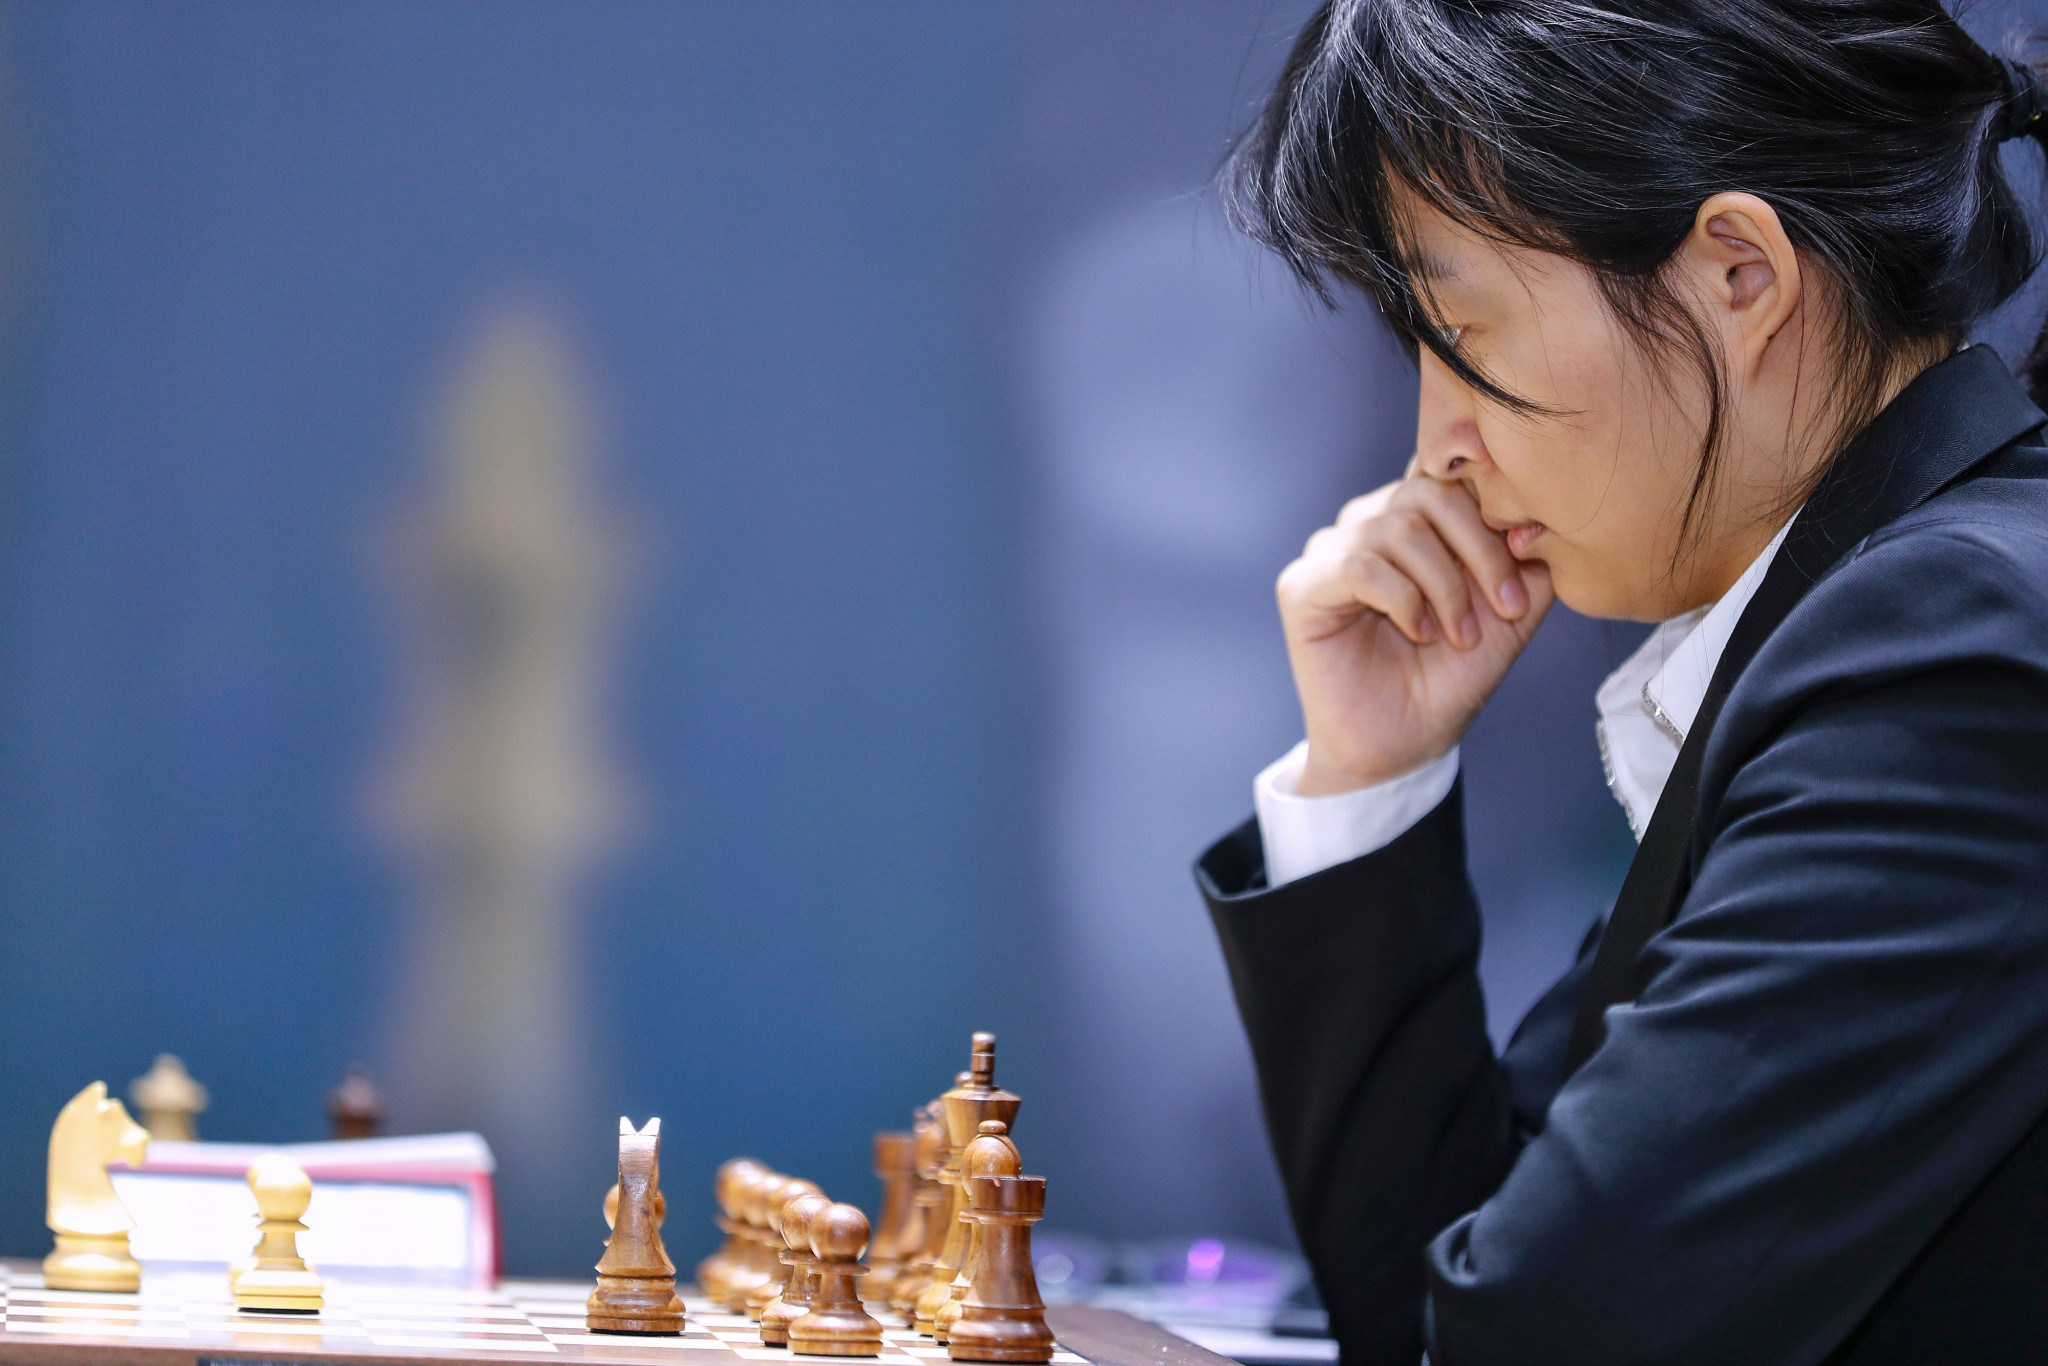 World champion Ju Wenjun is to play with black pieces in the opening game of the FIDE Women's World Championship match in Shanghai ©Getty Images